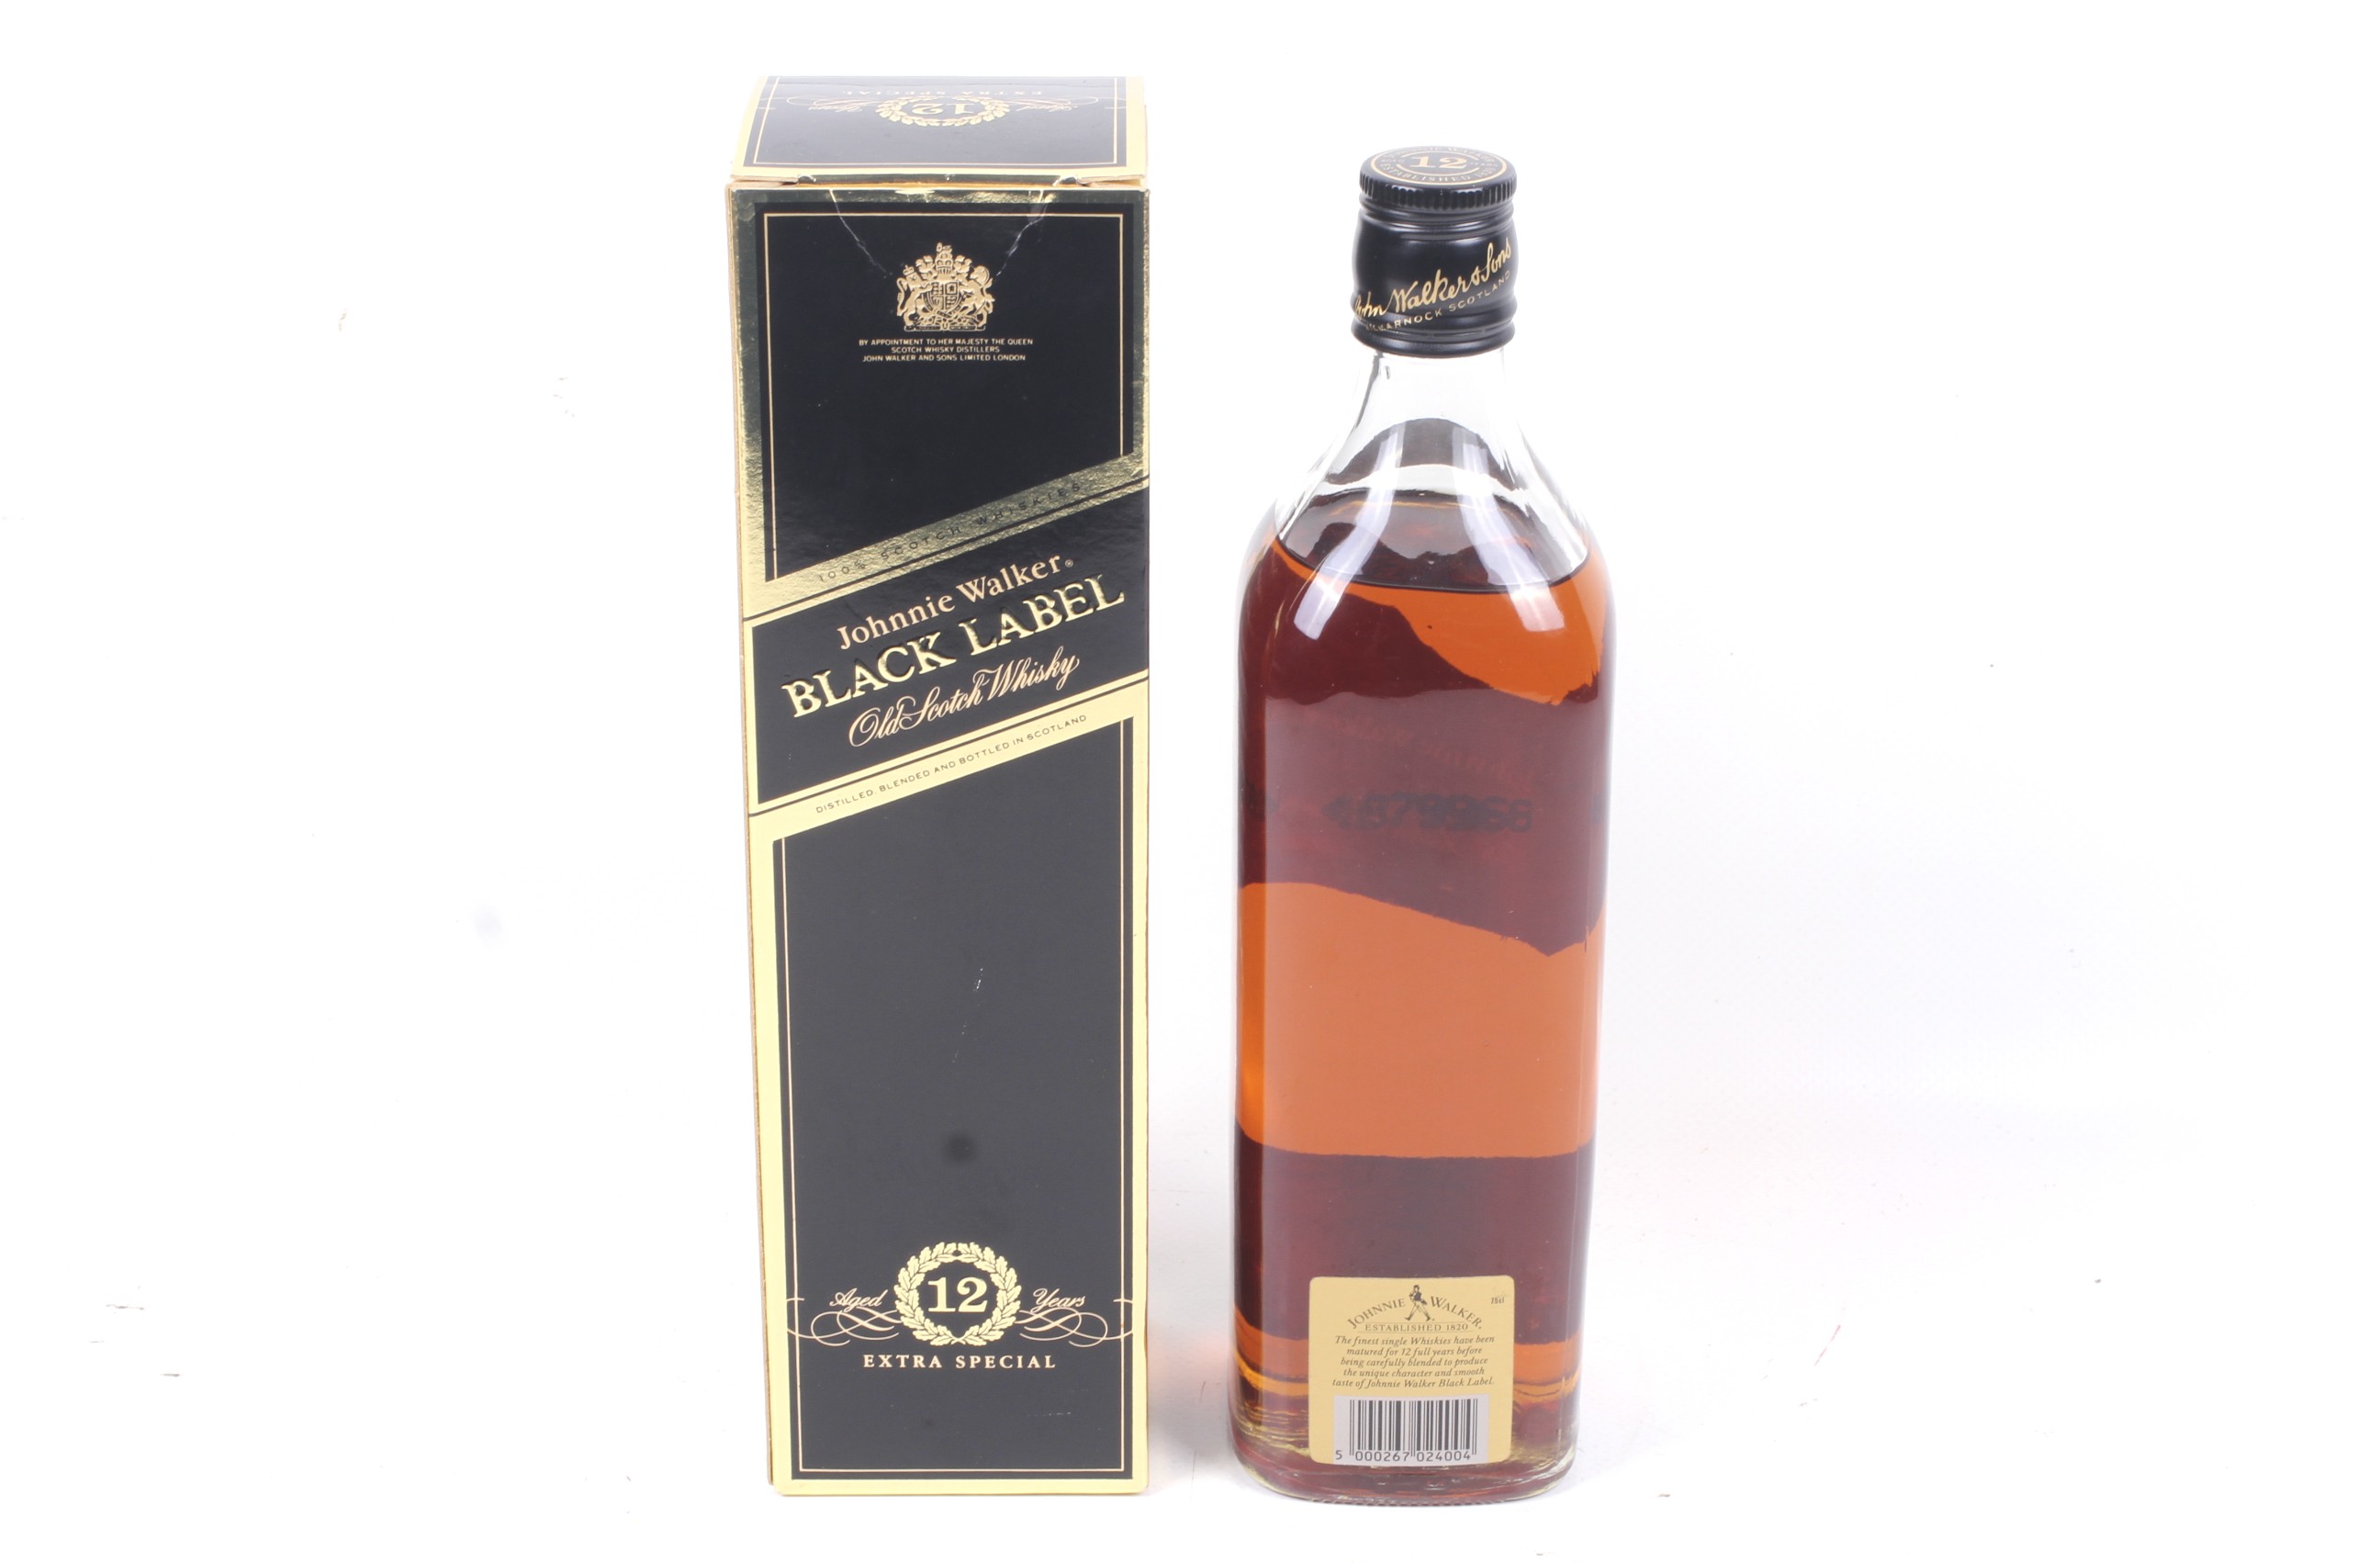 A bottle of Johnnie Walker black label 12 years old special reserve. 75cl, 40% vol, boxed. - Image 2 of 2